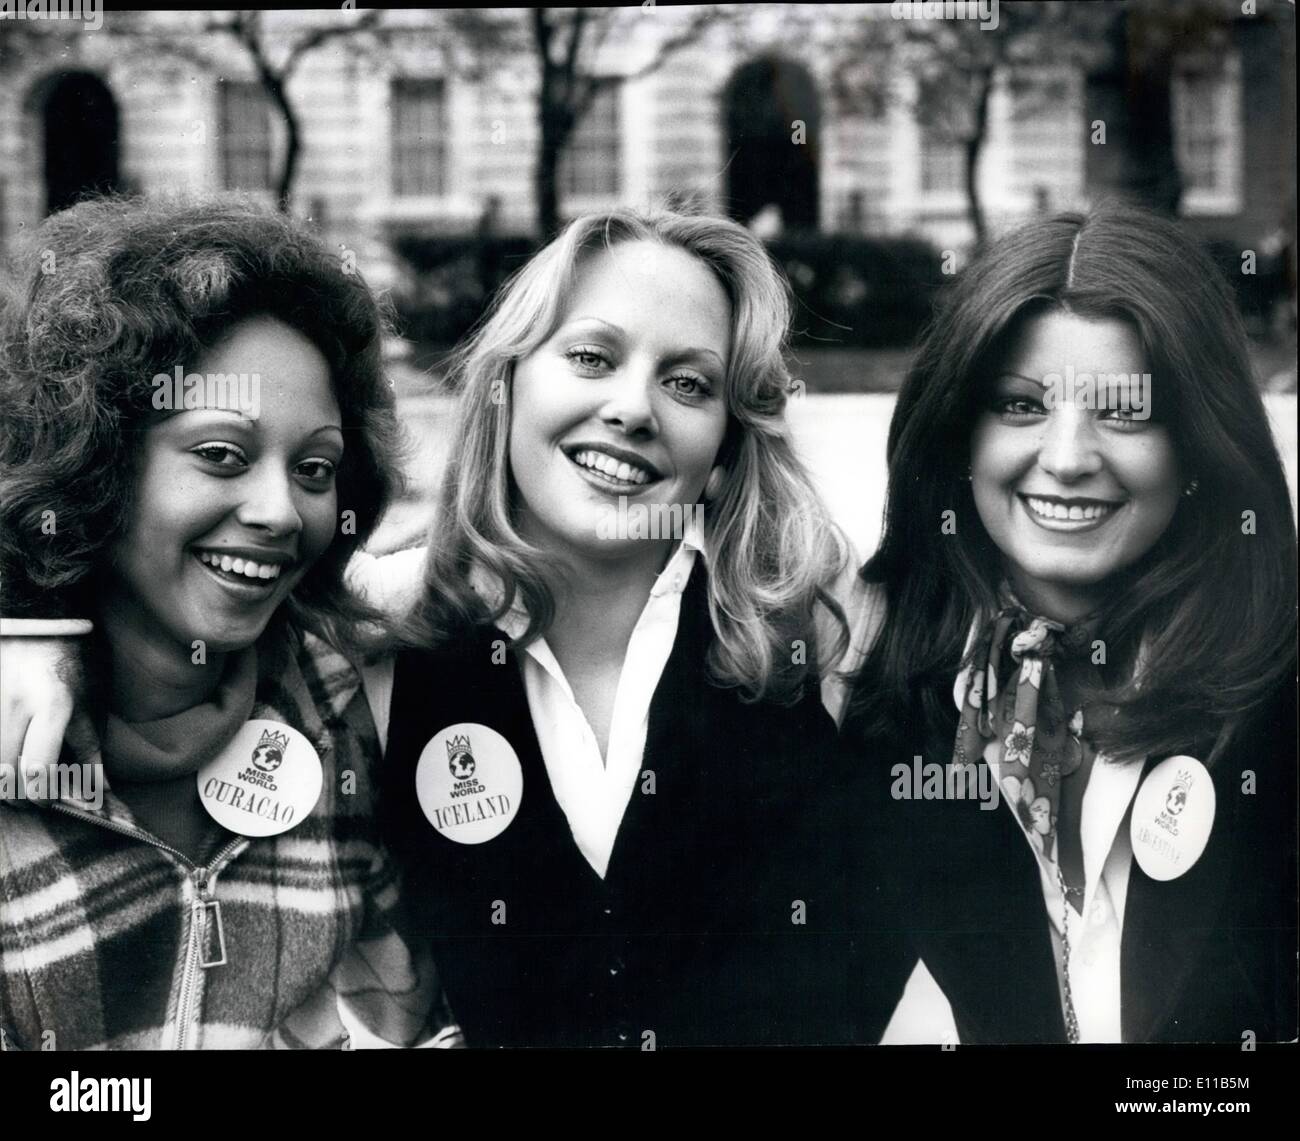 Nov. 08, 1976 - November 8th 1976 Contestants for the Miss World 1976 in London. For next Thursday's contest at the Royal Albert Hall. Photo Shows: Three of the contestants in London today (L to R) Viveca Francisca Marchena (Miss Curacao); Sigriour Helga Olgeirsdottir (Miss Iceland) and Miss Argentine. Stock Photo